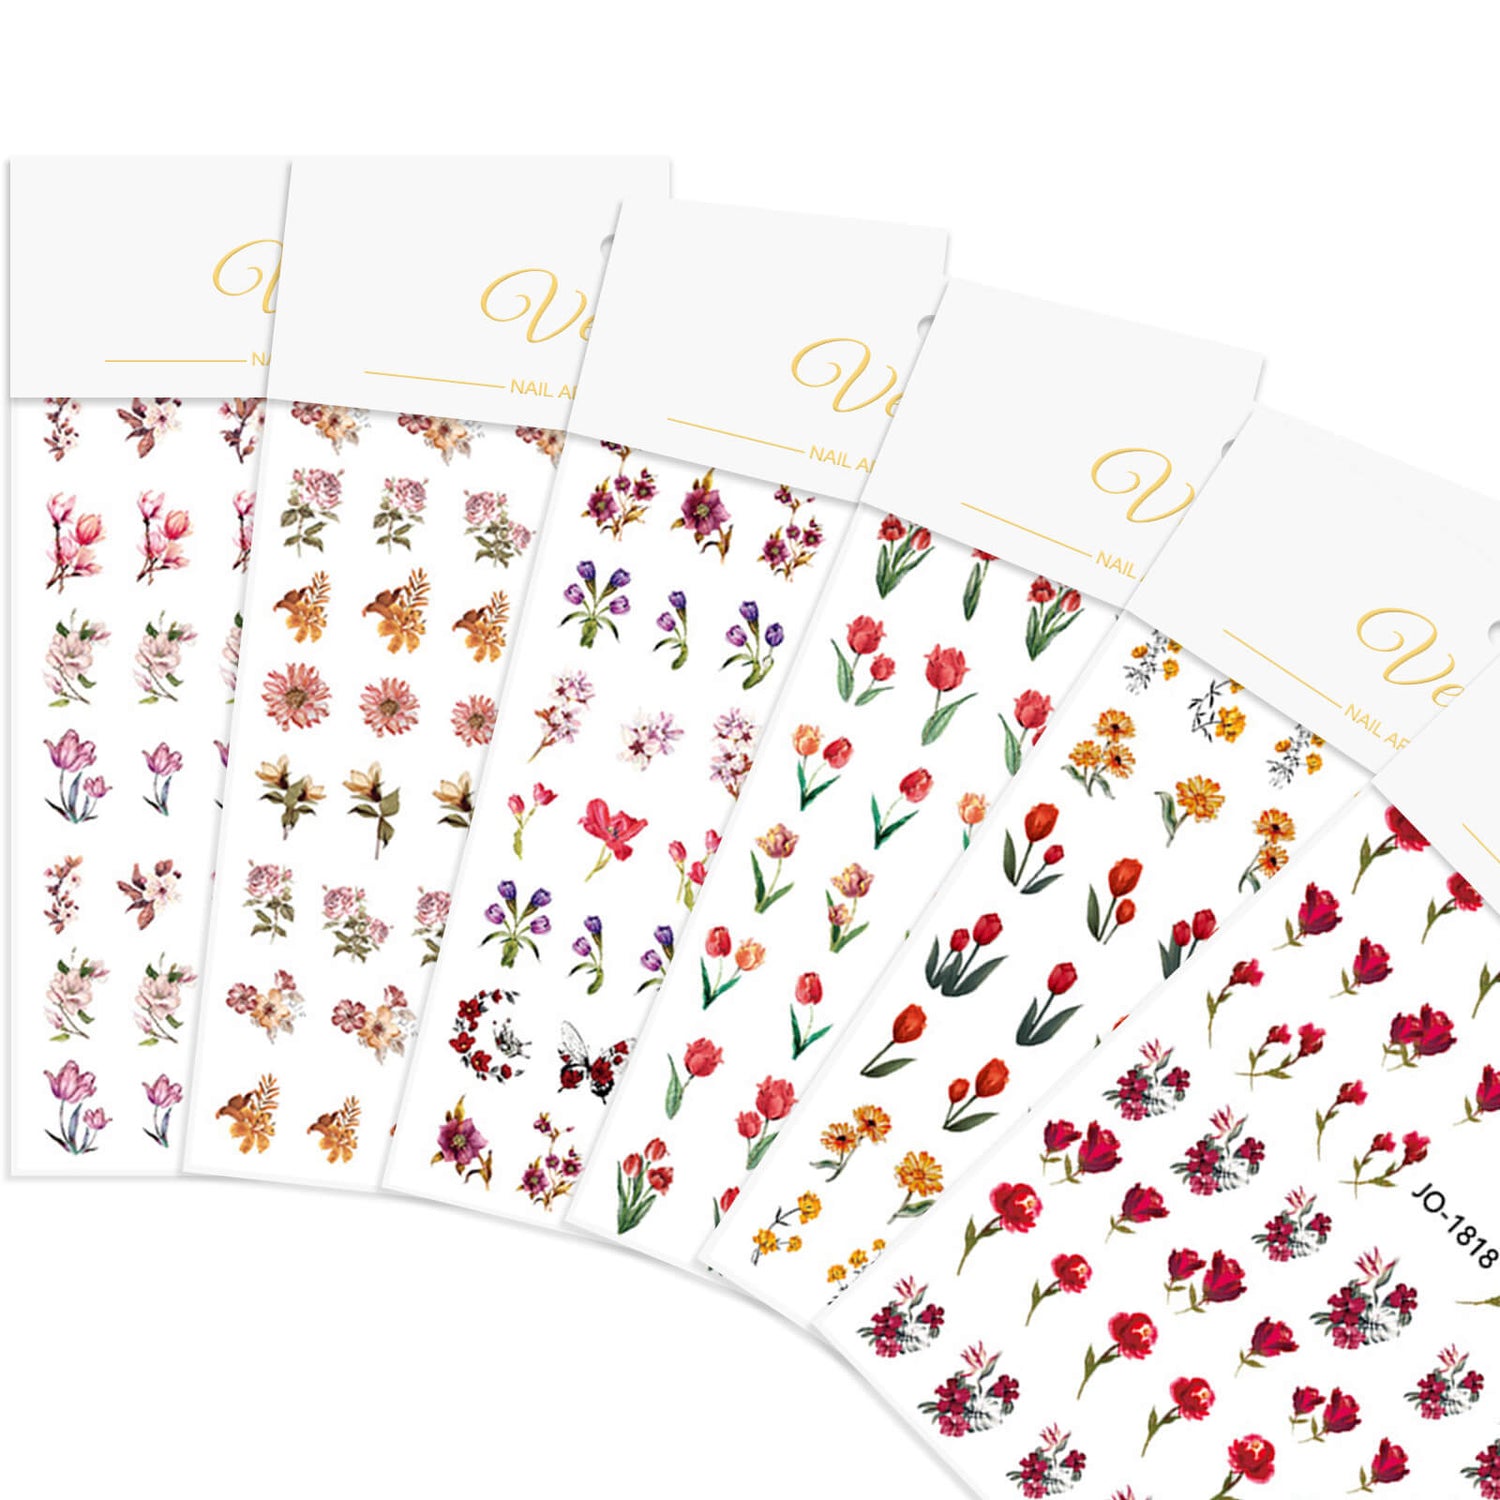 nail-art-stickers-dried-flower-set-all